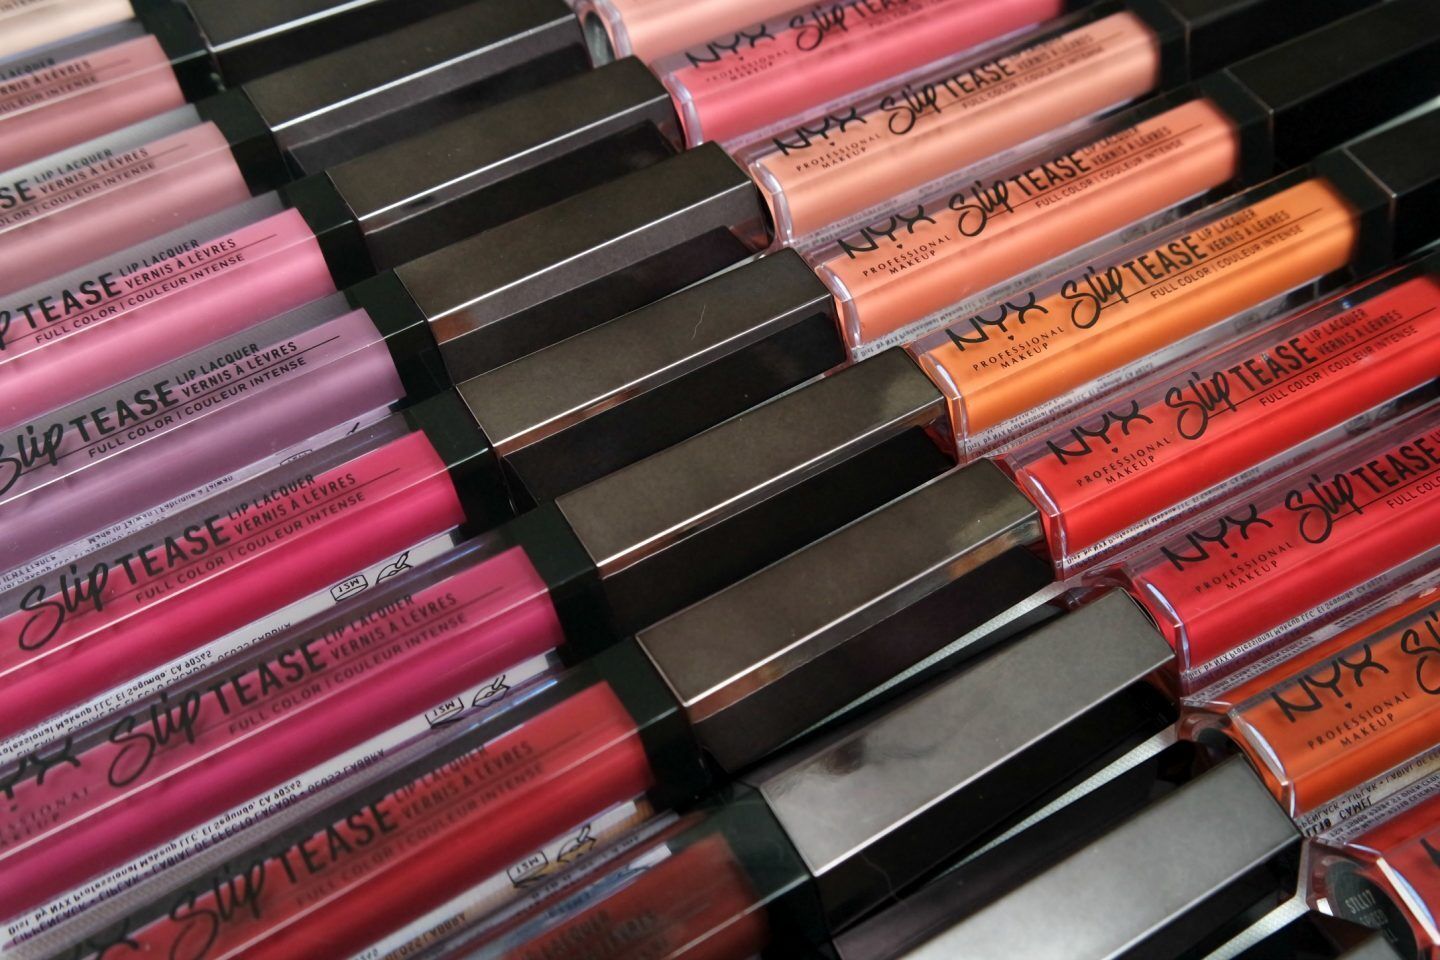 NYX Slip Tease Full Lip Lacquer - You choose Your Color - $6.50 - $7.00